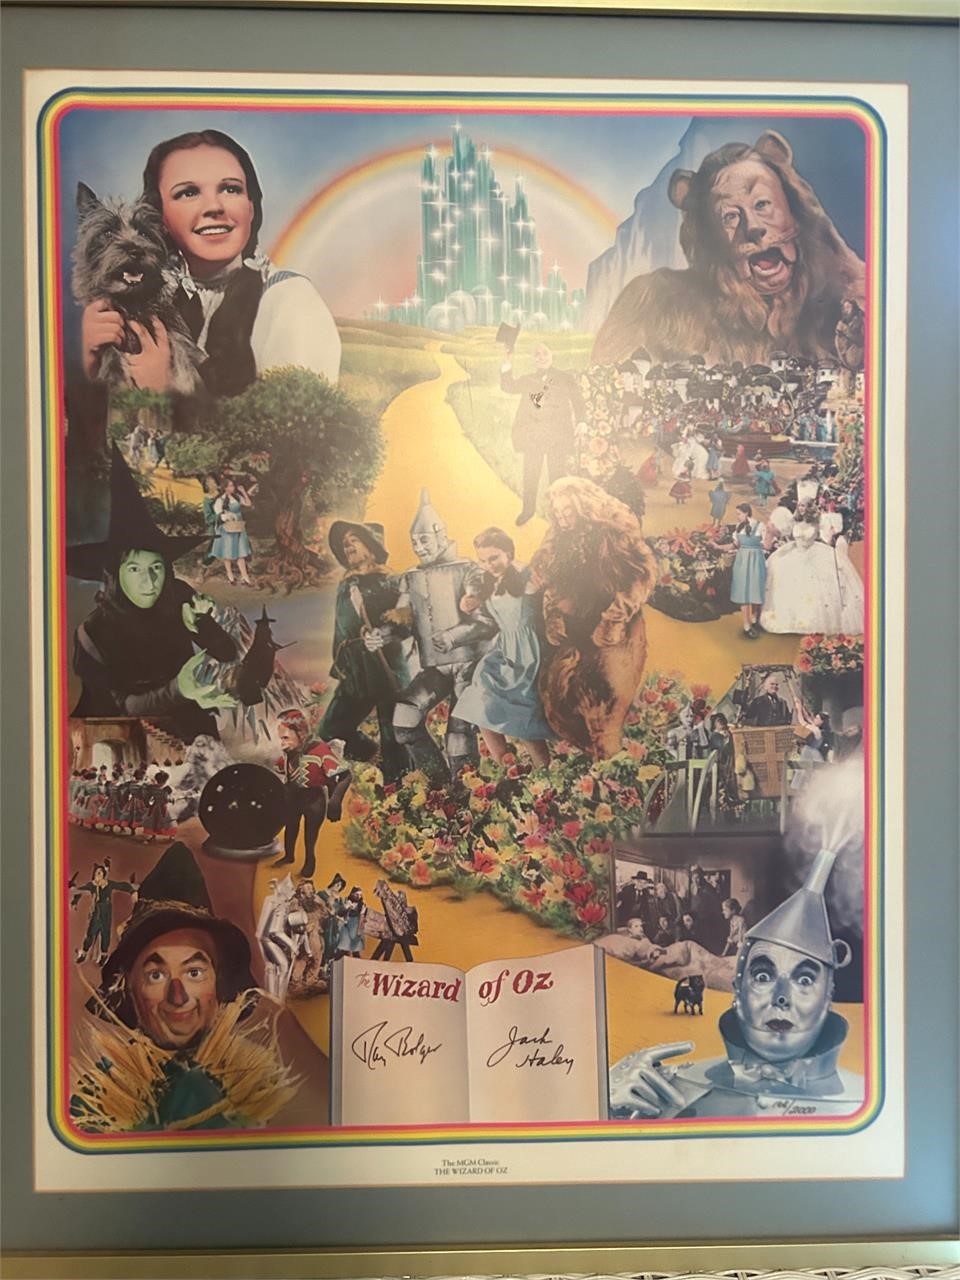 WIzard of OZ: Rare Collectibles, Antiques, Furniture